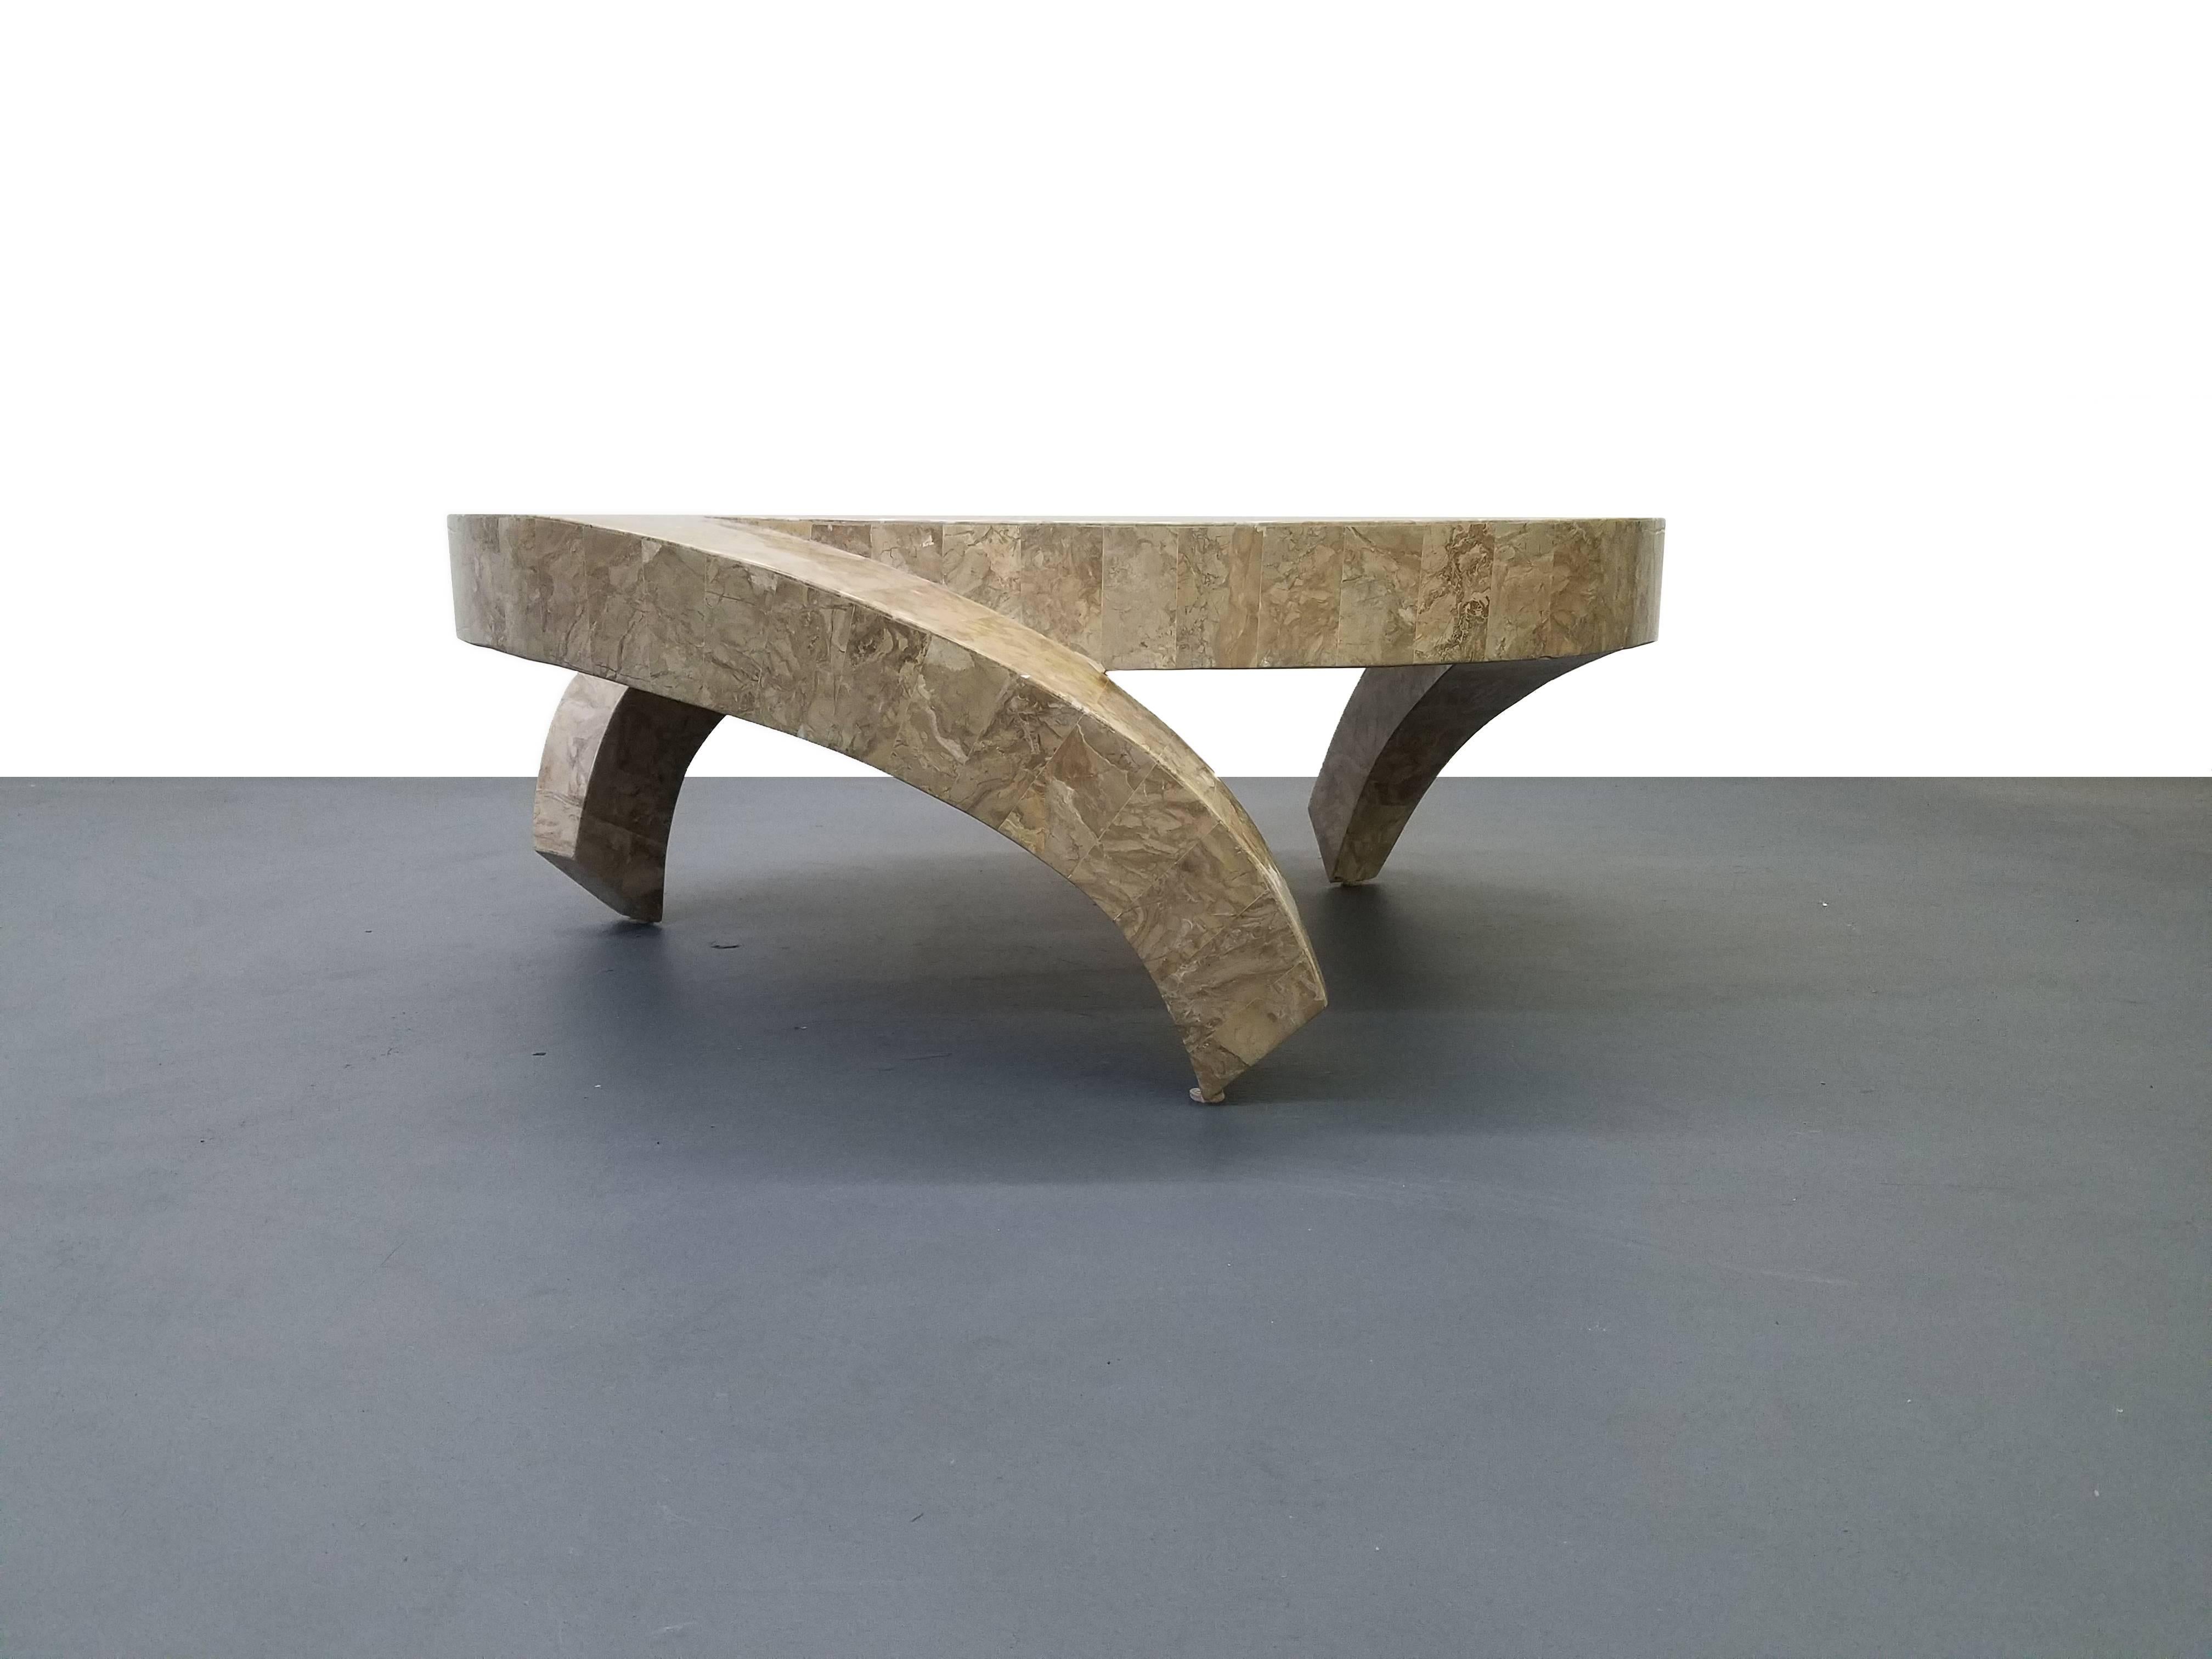 Unique tessellated stone coffee table by Maitland Smith. Table has a very eye-catching shape, with three waterfall legs. Very designer, you'll likely never see another like it.